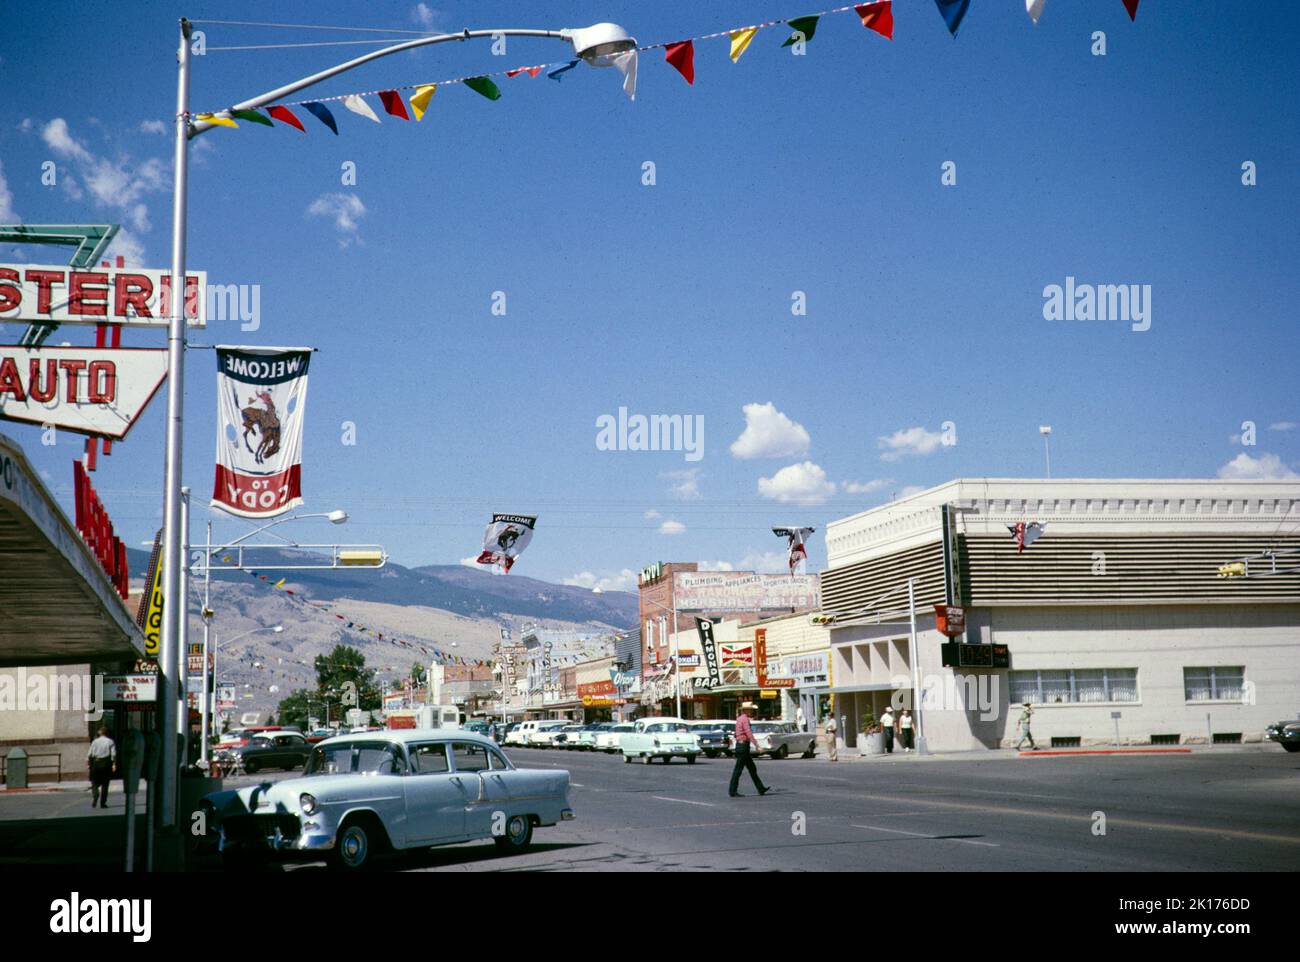 Street scene with cars and stores, Cody, Wyoming, USA 1963 Stock Photo